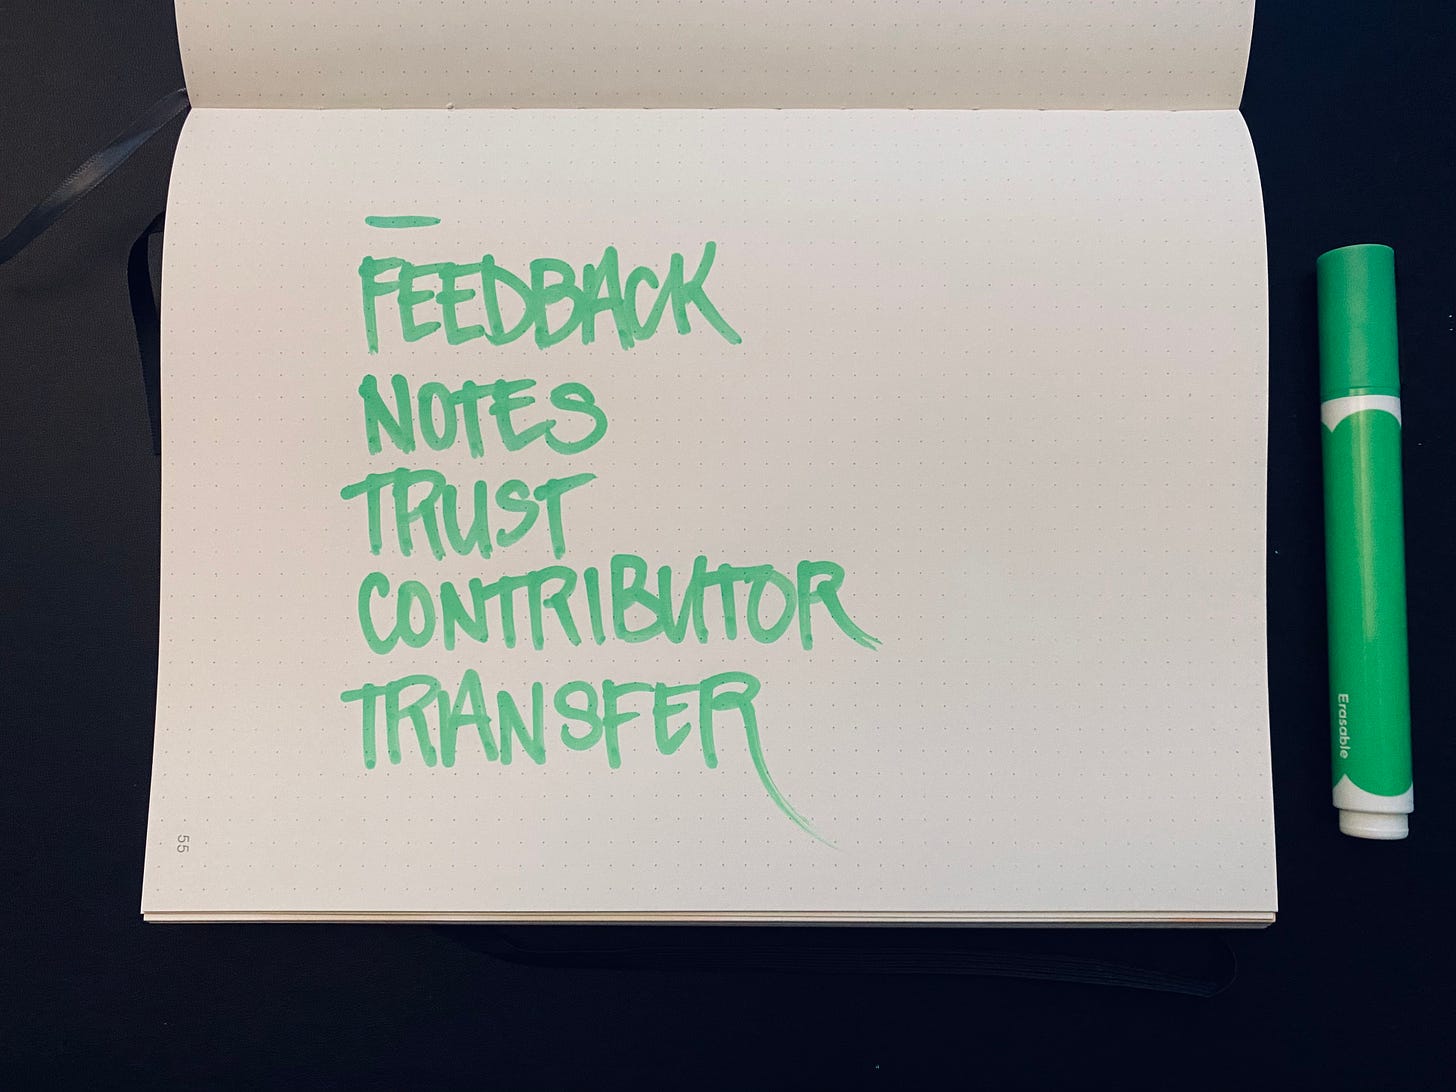 words written in green paint, in notebook page